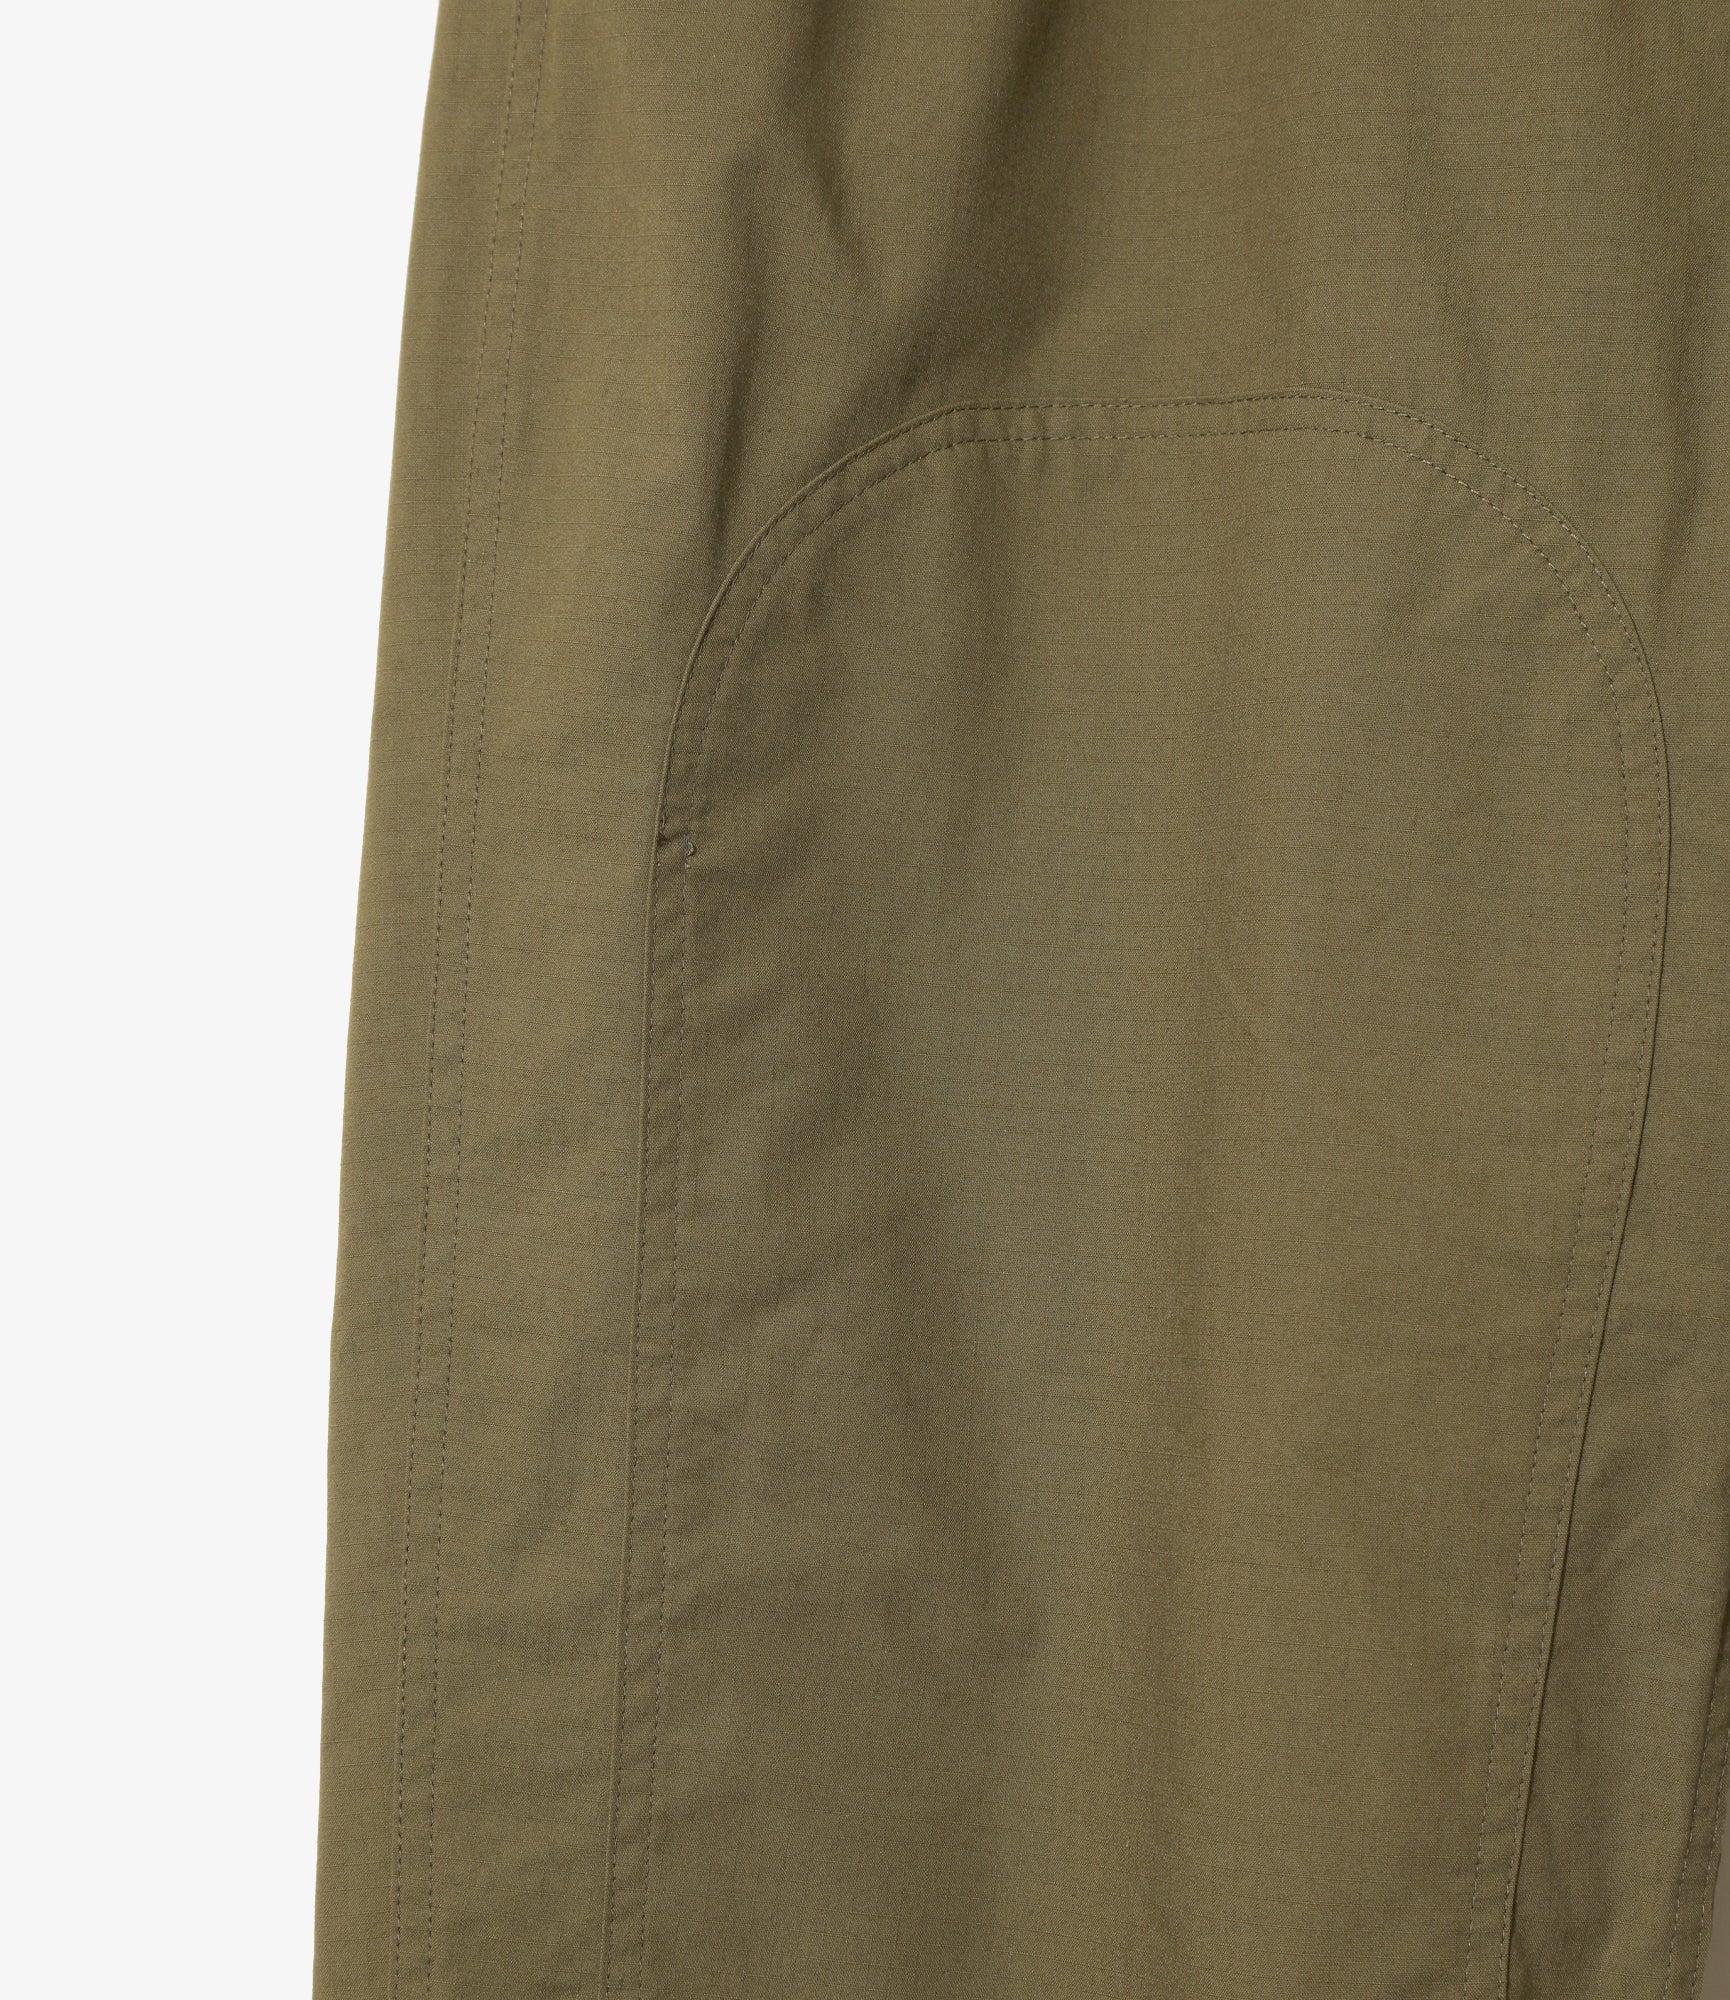 Belted Double Knee Pant - Olive - C/MO Ripstop